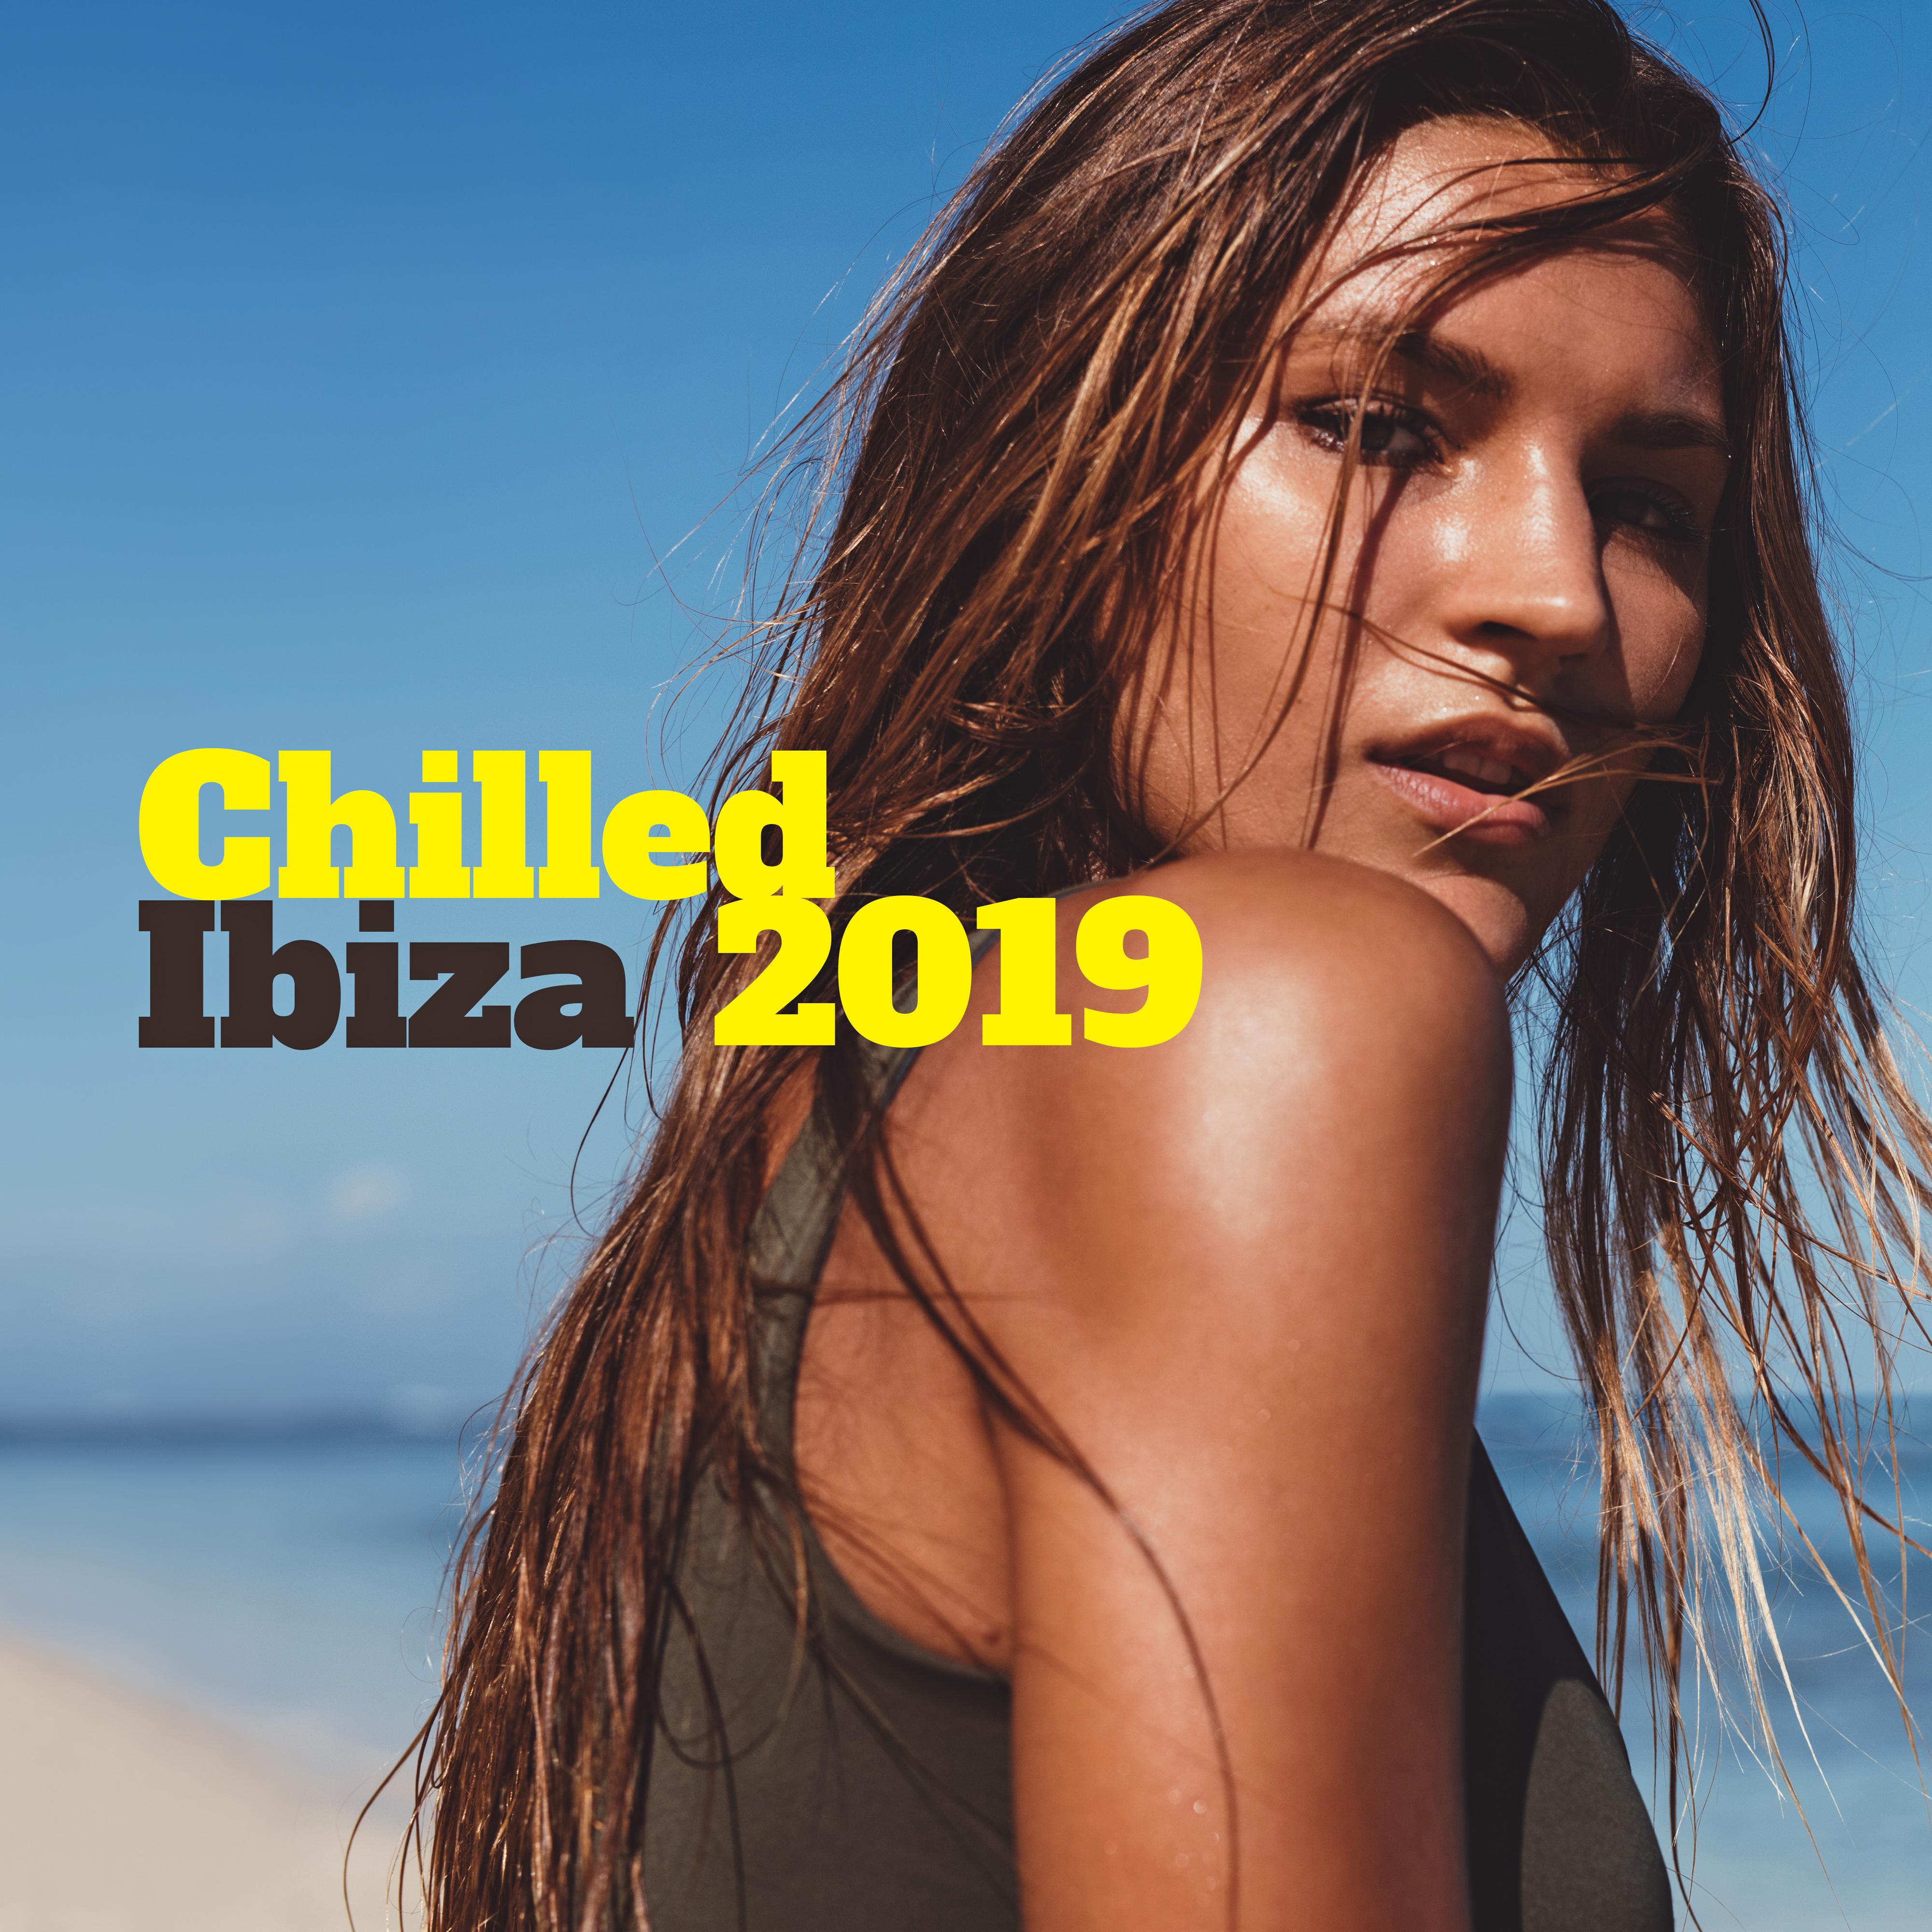 Chilled Ibiza 2019: Ibiza Chill Out, Lounge, Chillout ZONE, Reduce Stress, Bar Chillout, Beach Music, Relax, Rest, Ambient Chill